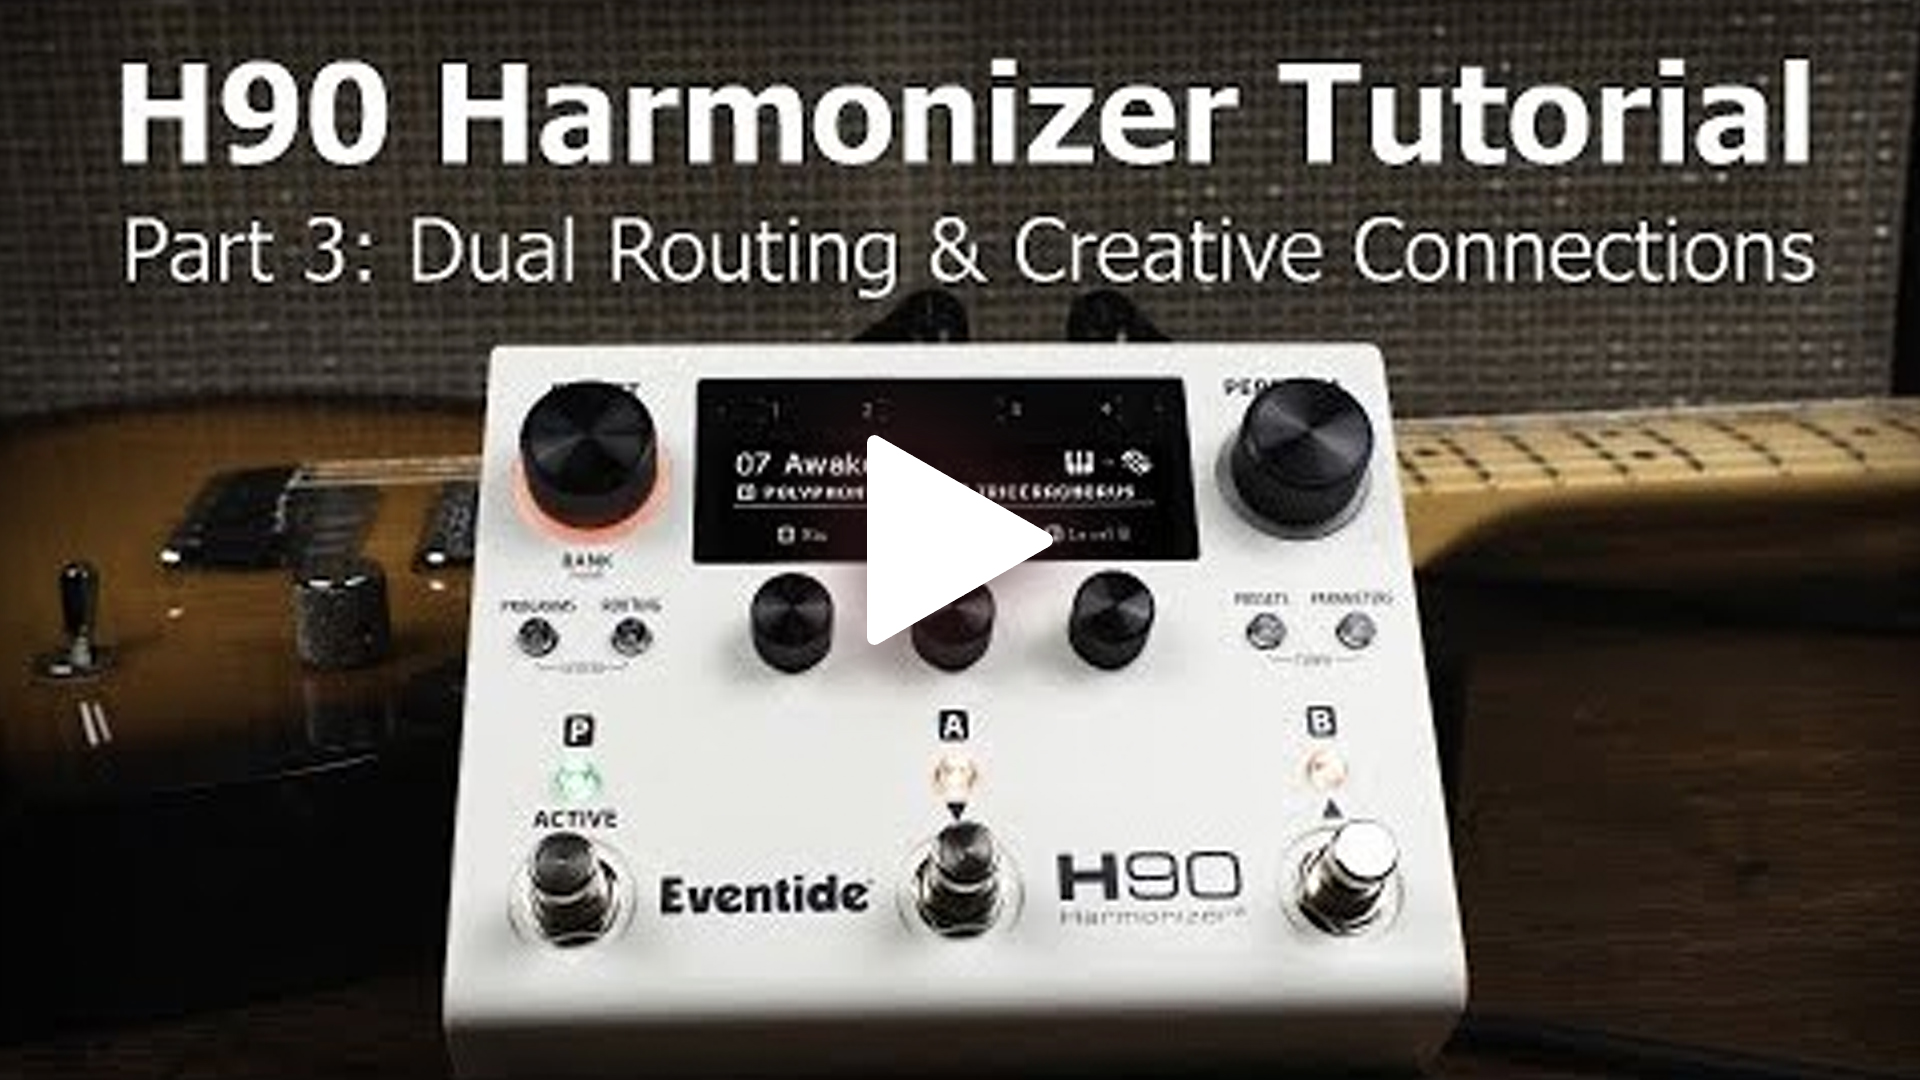 H90 Tutorial - Part 3: Dual Routing & Creative Connections